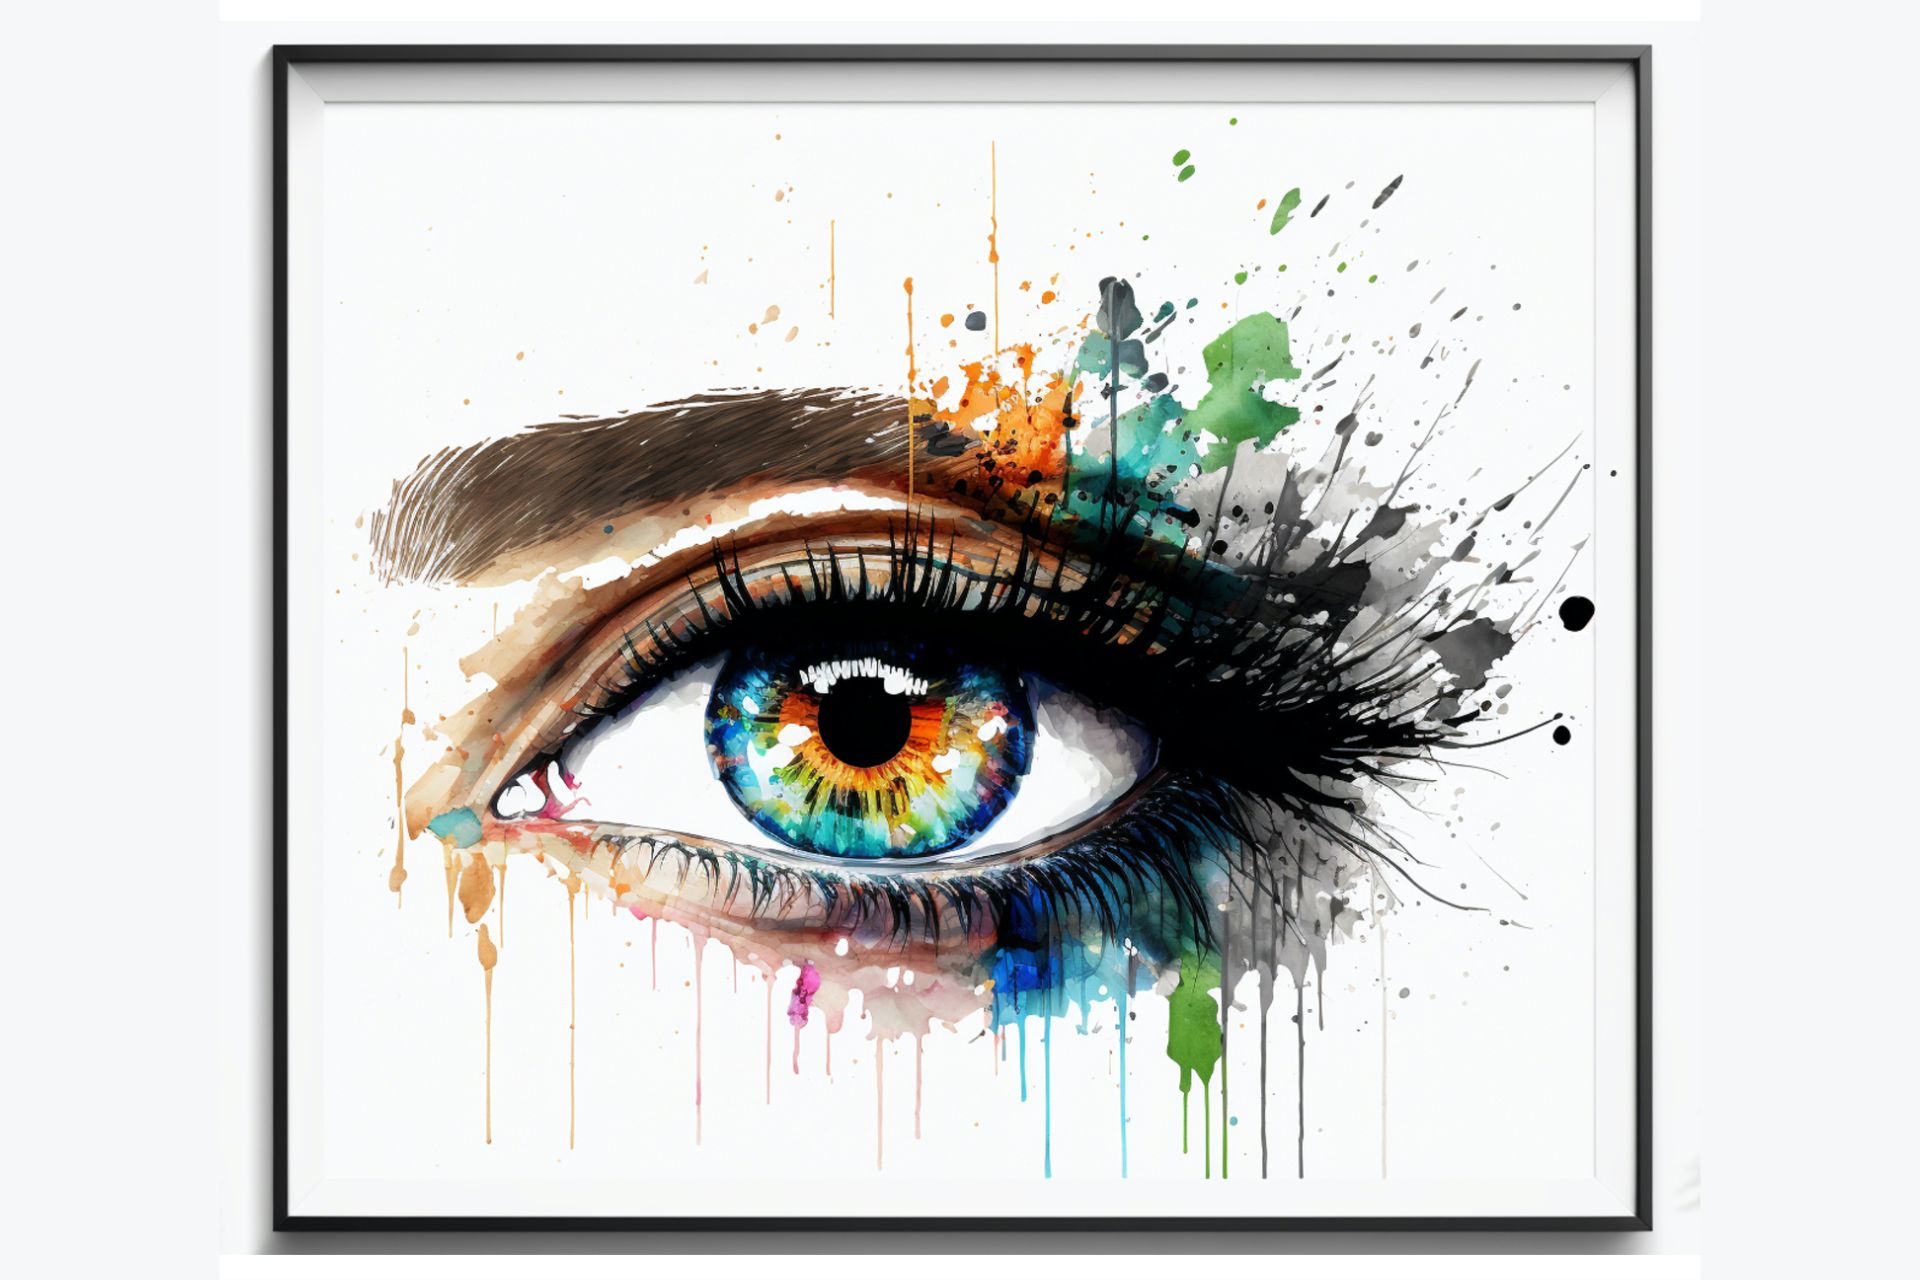 a painting of a woman’s eye, paint smears are makeup, pencil, ink and watercolour, white background